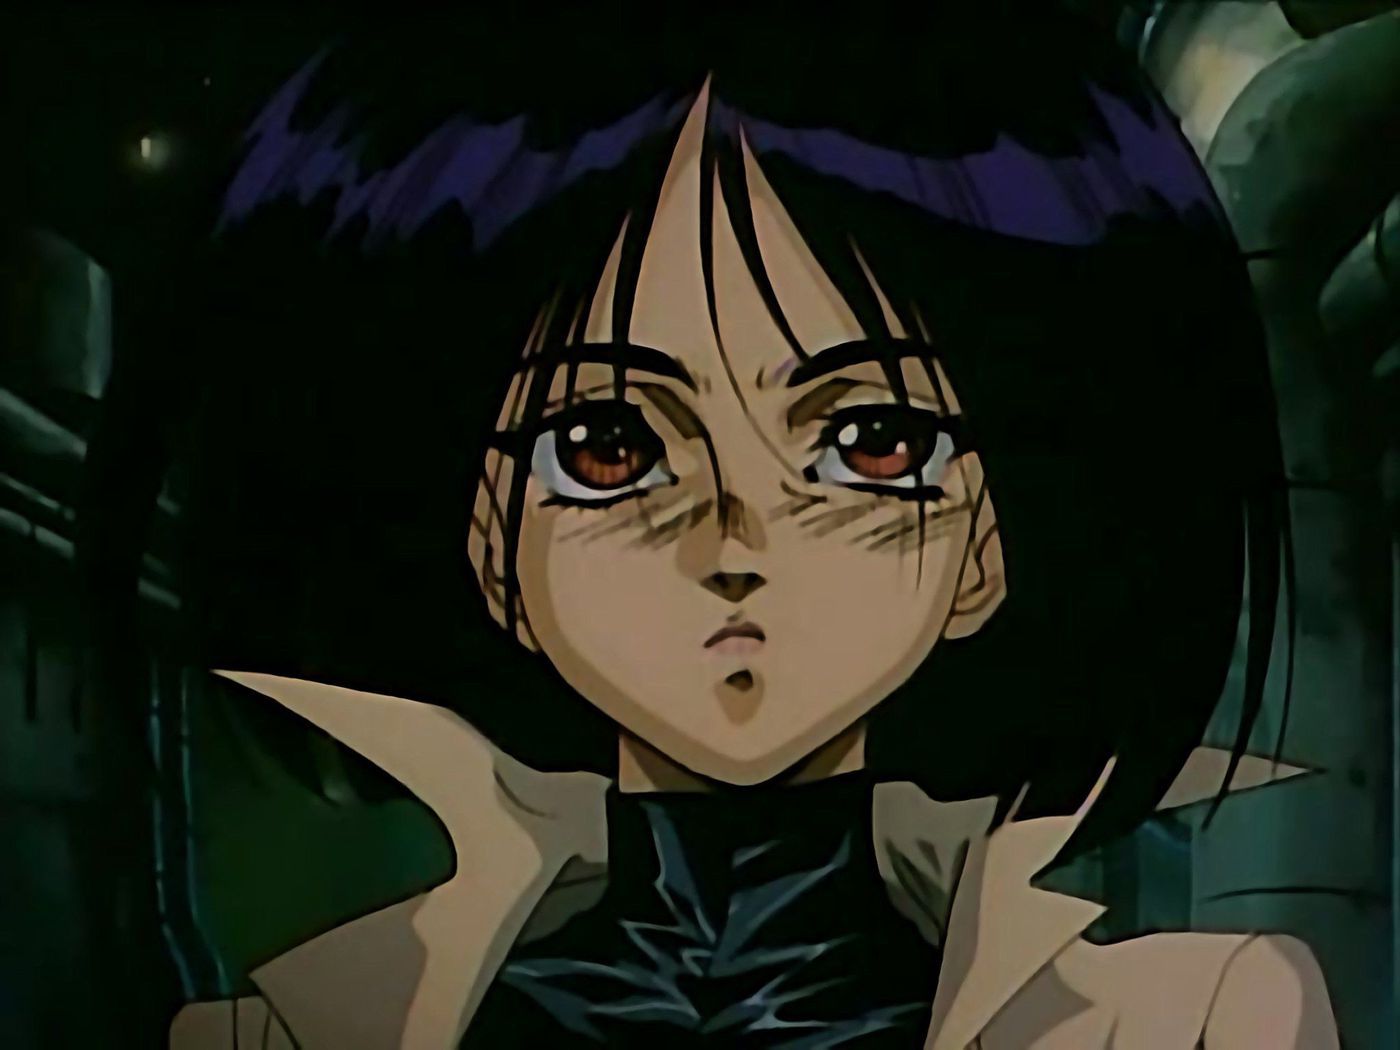 Battle Angel's anime stopped short in the '90s